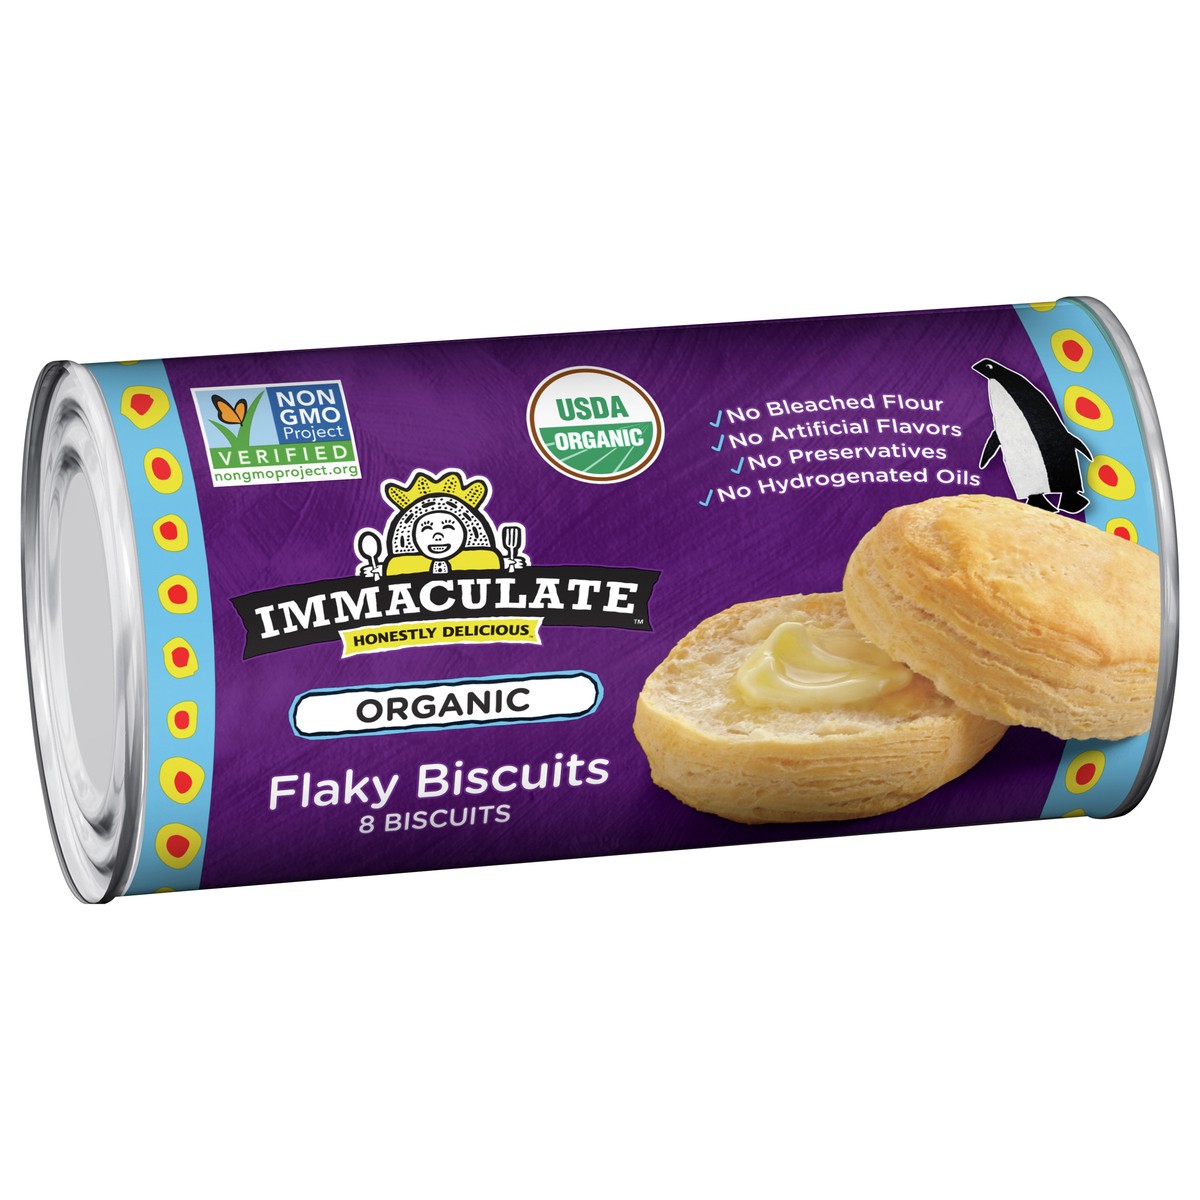 slide 12 of 13, Immaculate Baking Organic Flaky Biscuits, Refrigerated Dough, 8 Biscuits, 16 oz., 8 ct